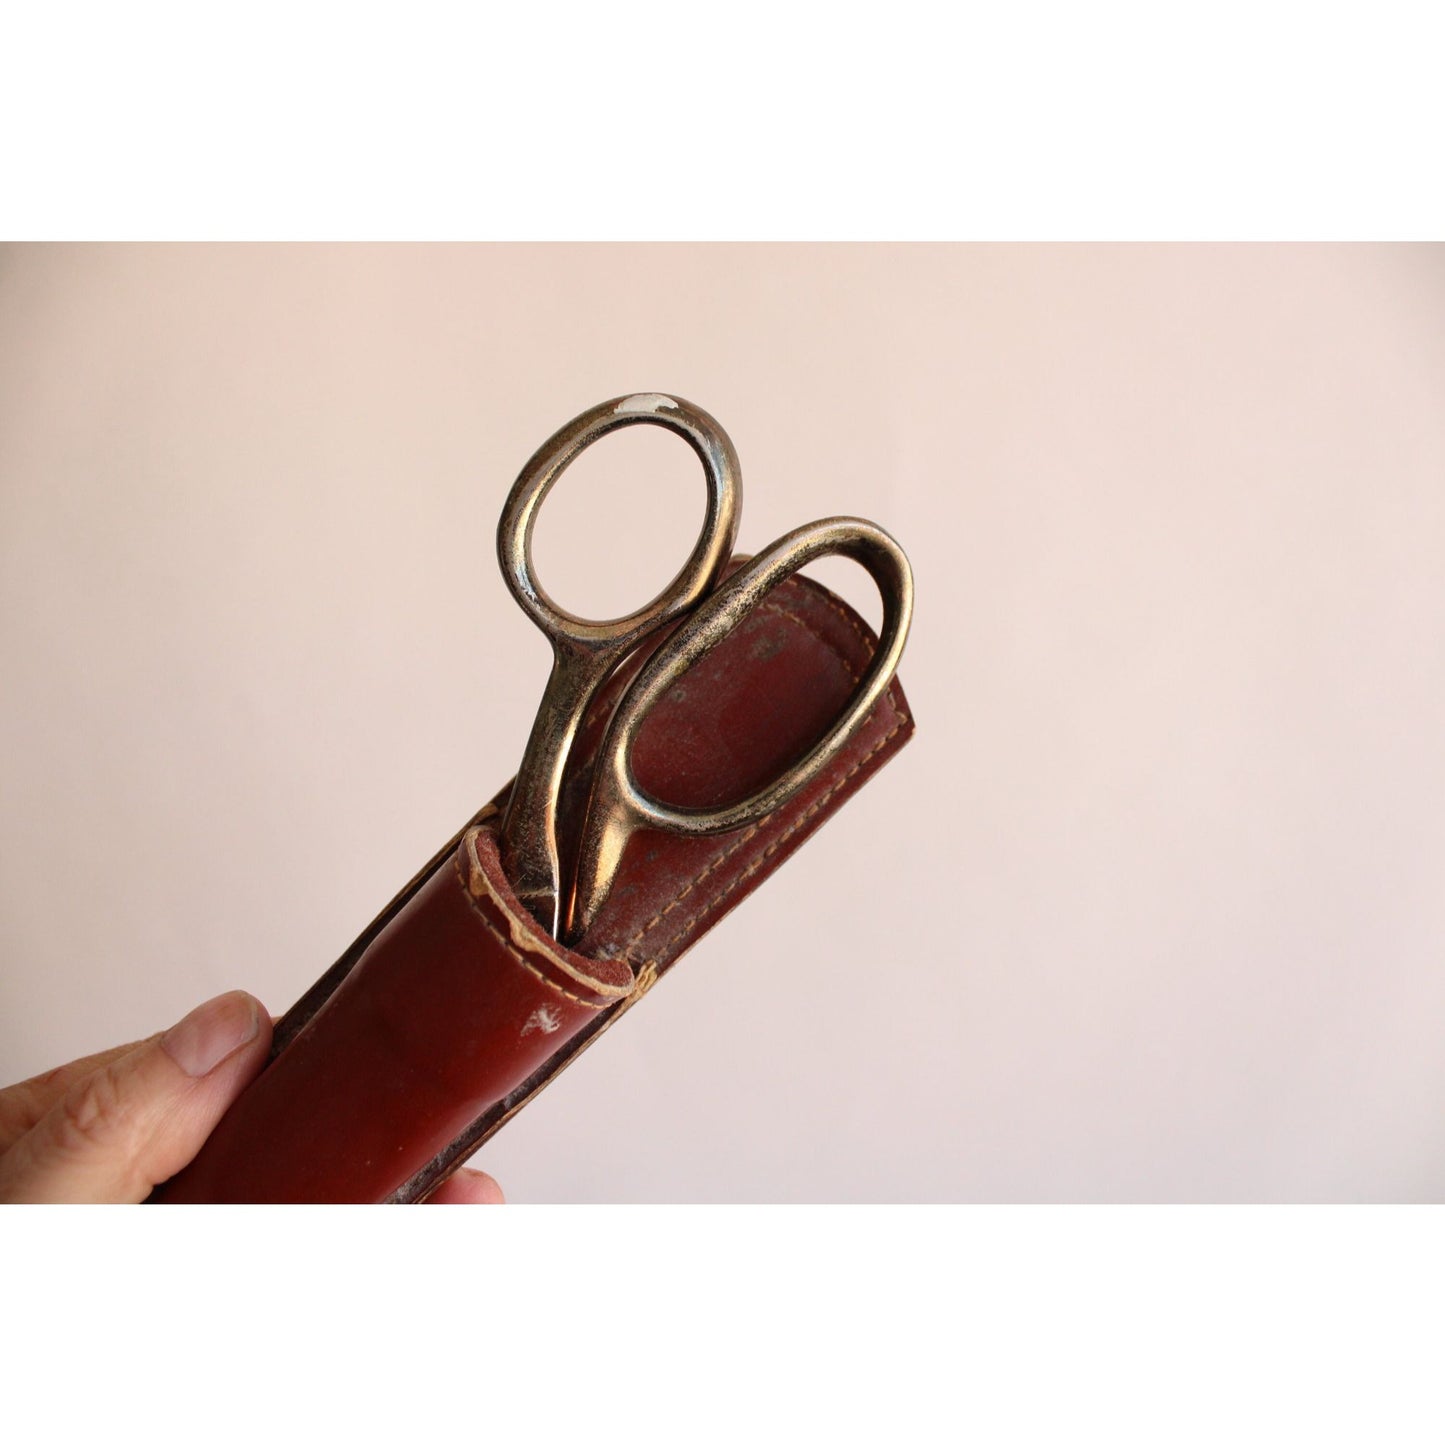 Vintage 1940s 1950s Radiant Golden Age Scissors by Richards of Sheffield England